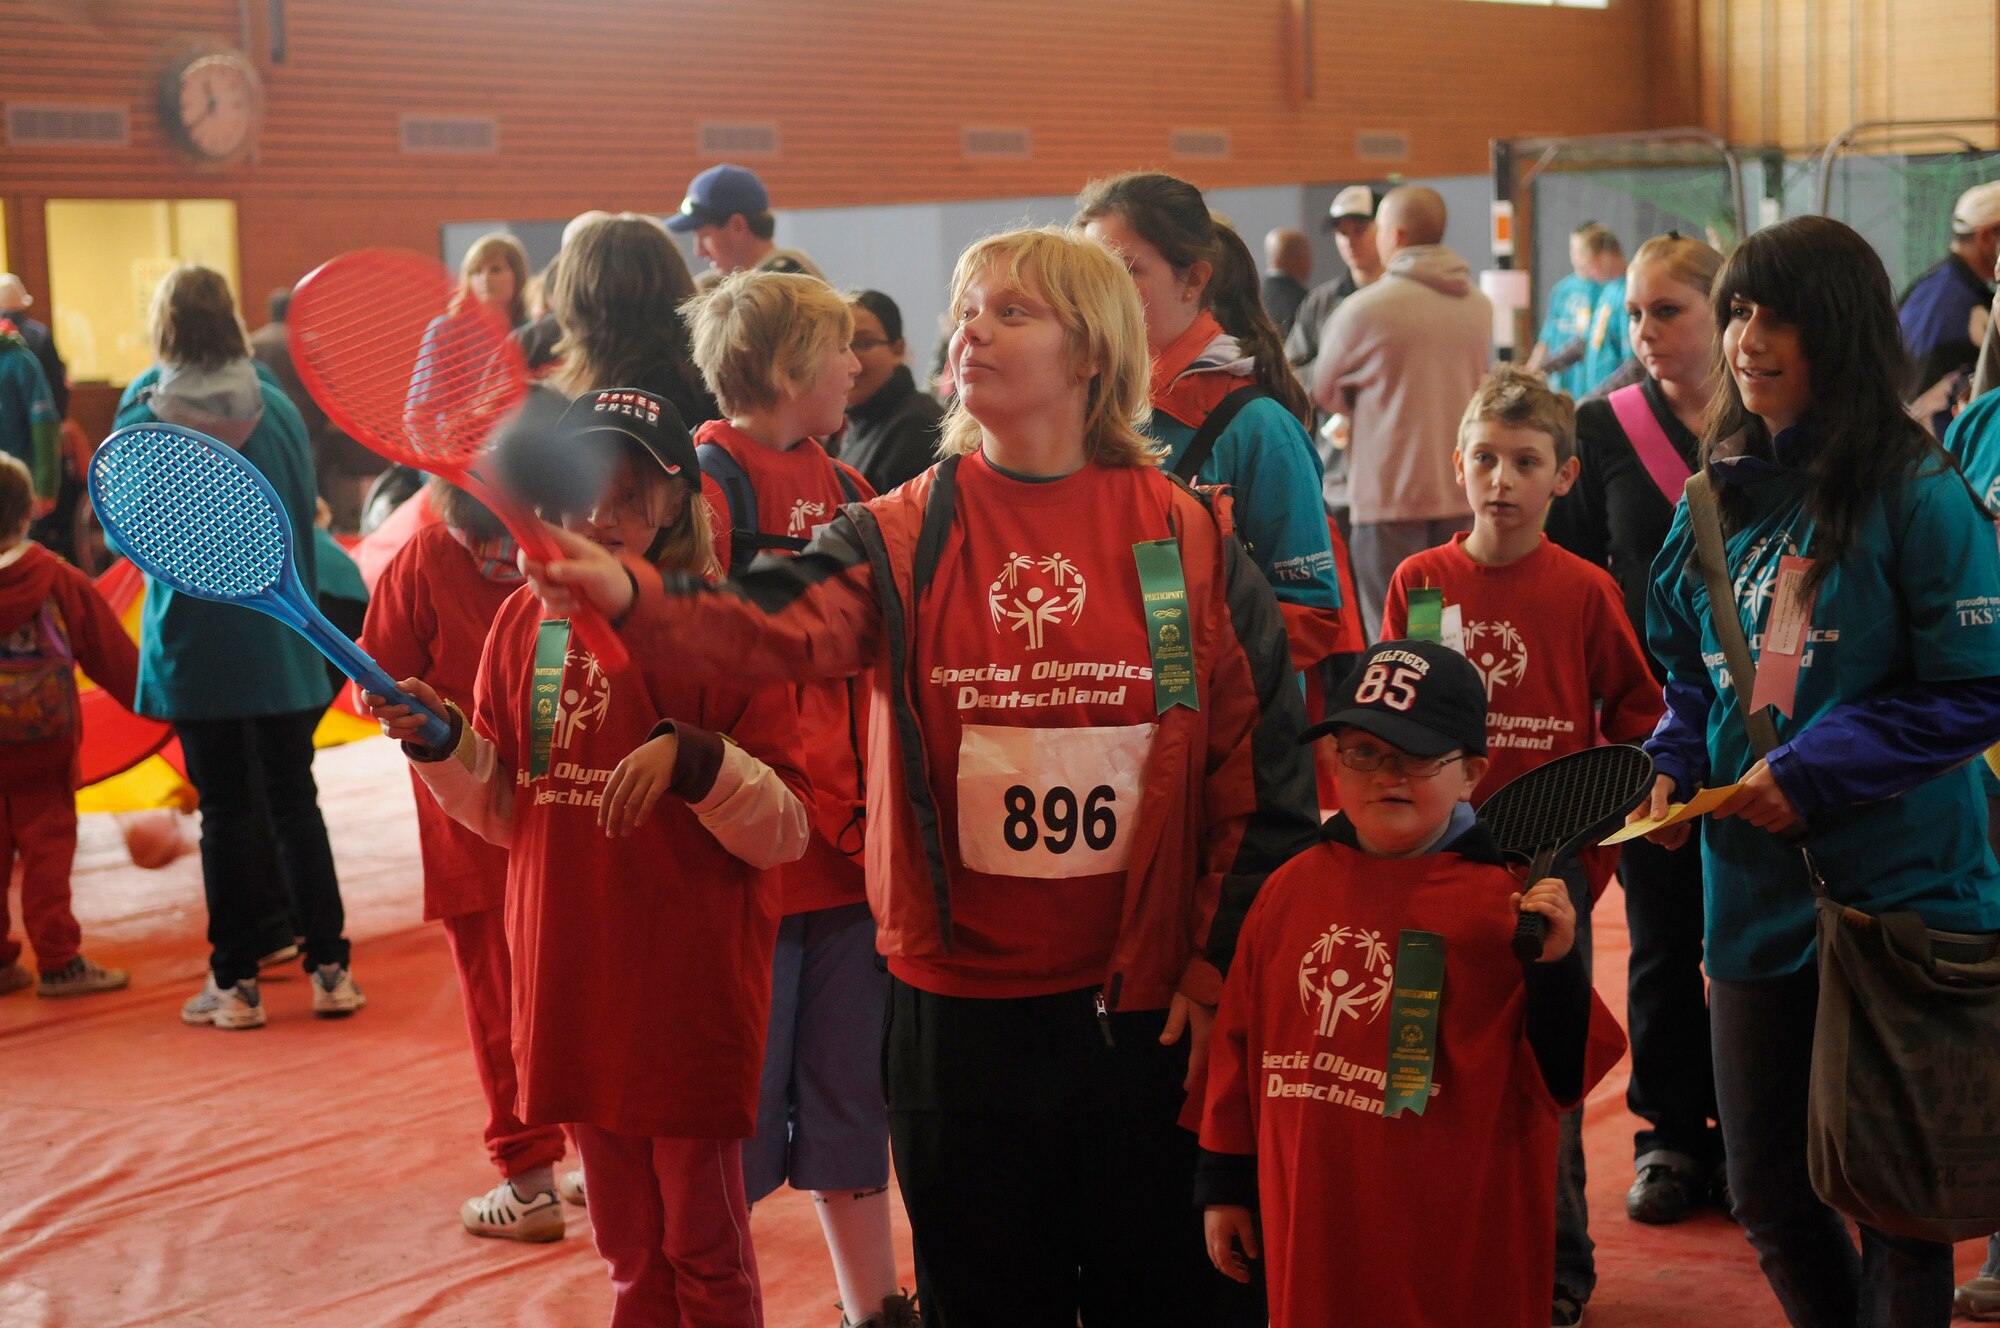 Athletes participate in racket ball as their buddies look on during the Special Olympics held in Enkenbach-Alsenborn, Germany, May 12, 2010. Special Olympics is a worldwide event for children and adults with disabilities to build confidence and foster friendship. The Kaiserslautern Military Community hosted its 27th Annual Special Olympics for over 800 athletes. (U.S. Air Force photo by Airman 1st Class Desiree Esposito)